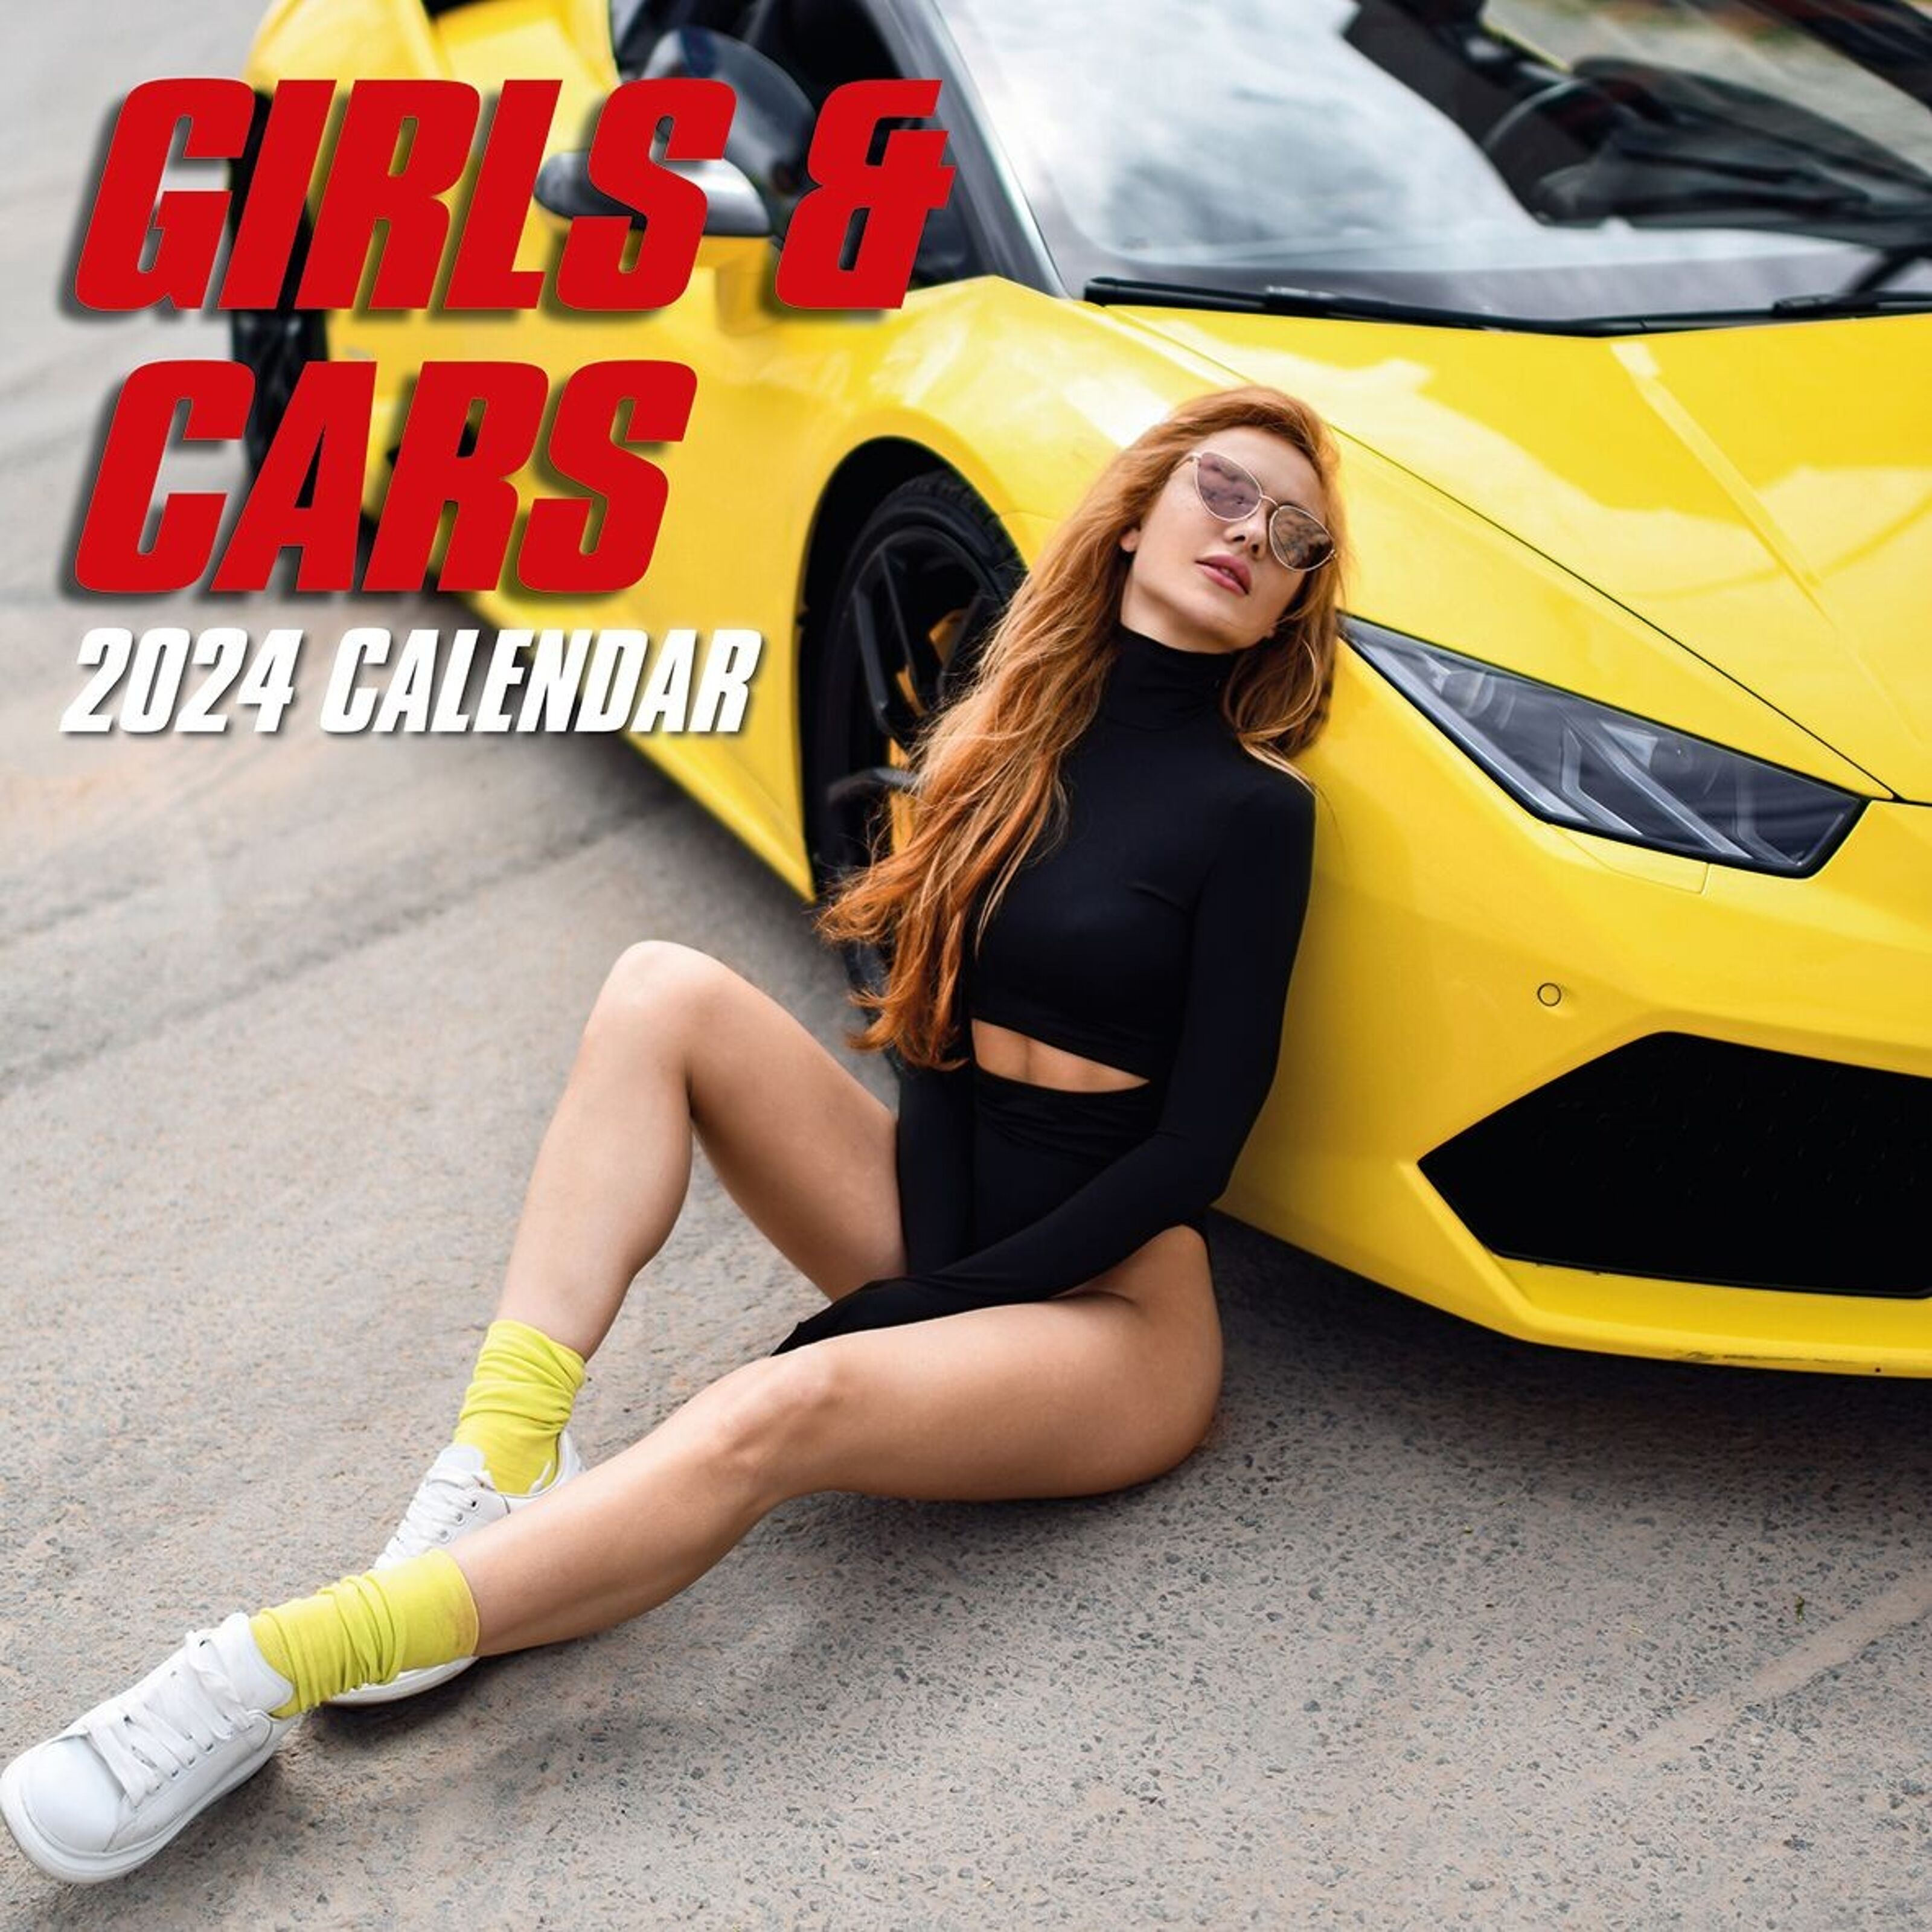 Maxi Calendrier 2024 Sexy Femme Exclusive